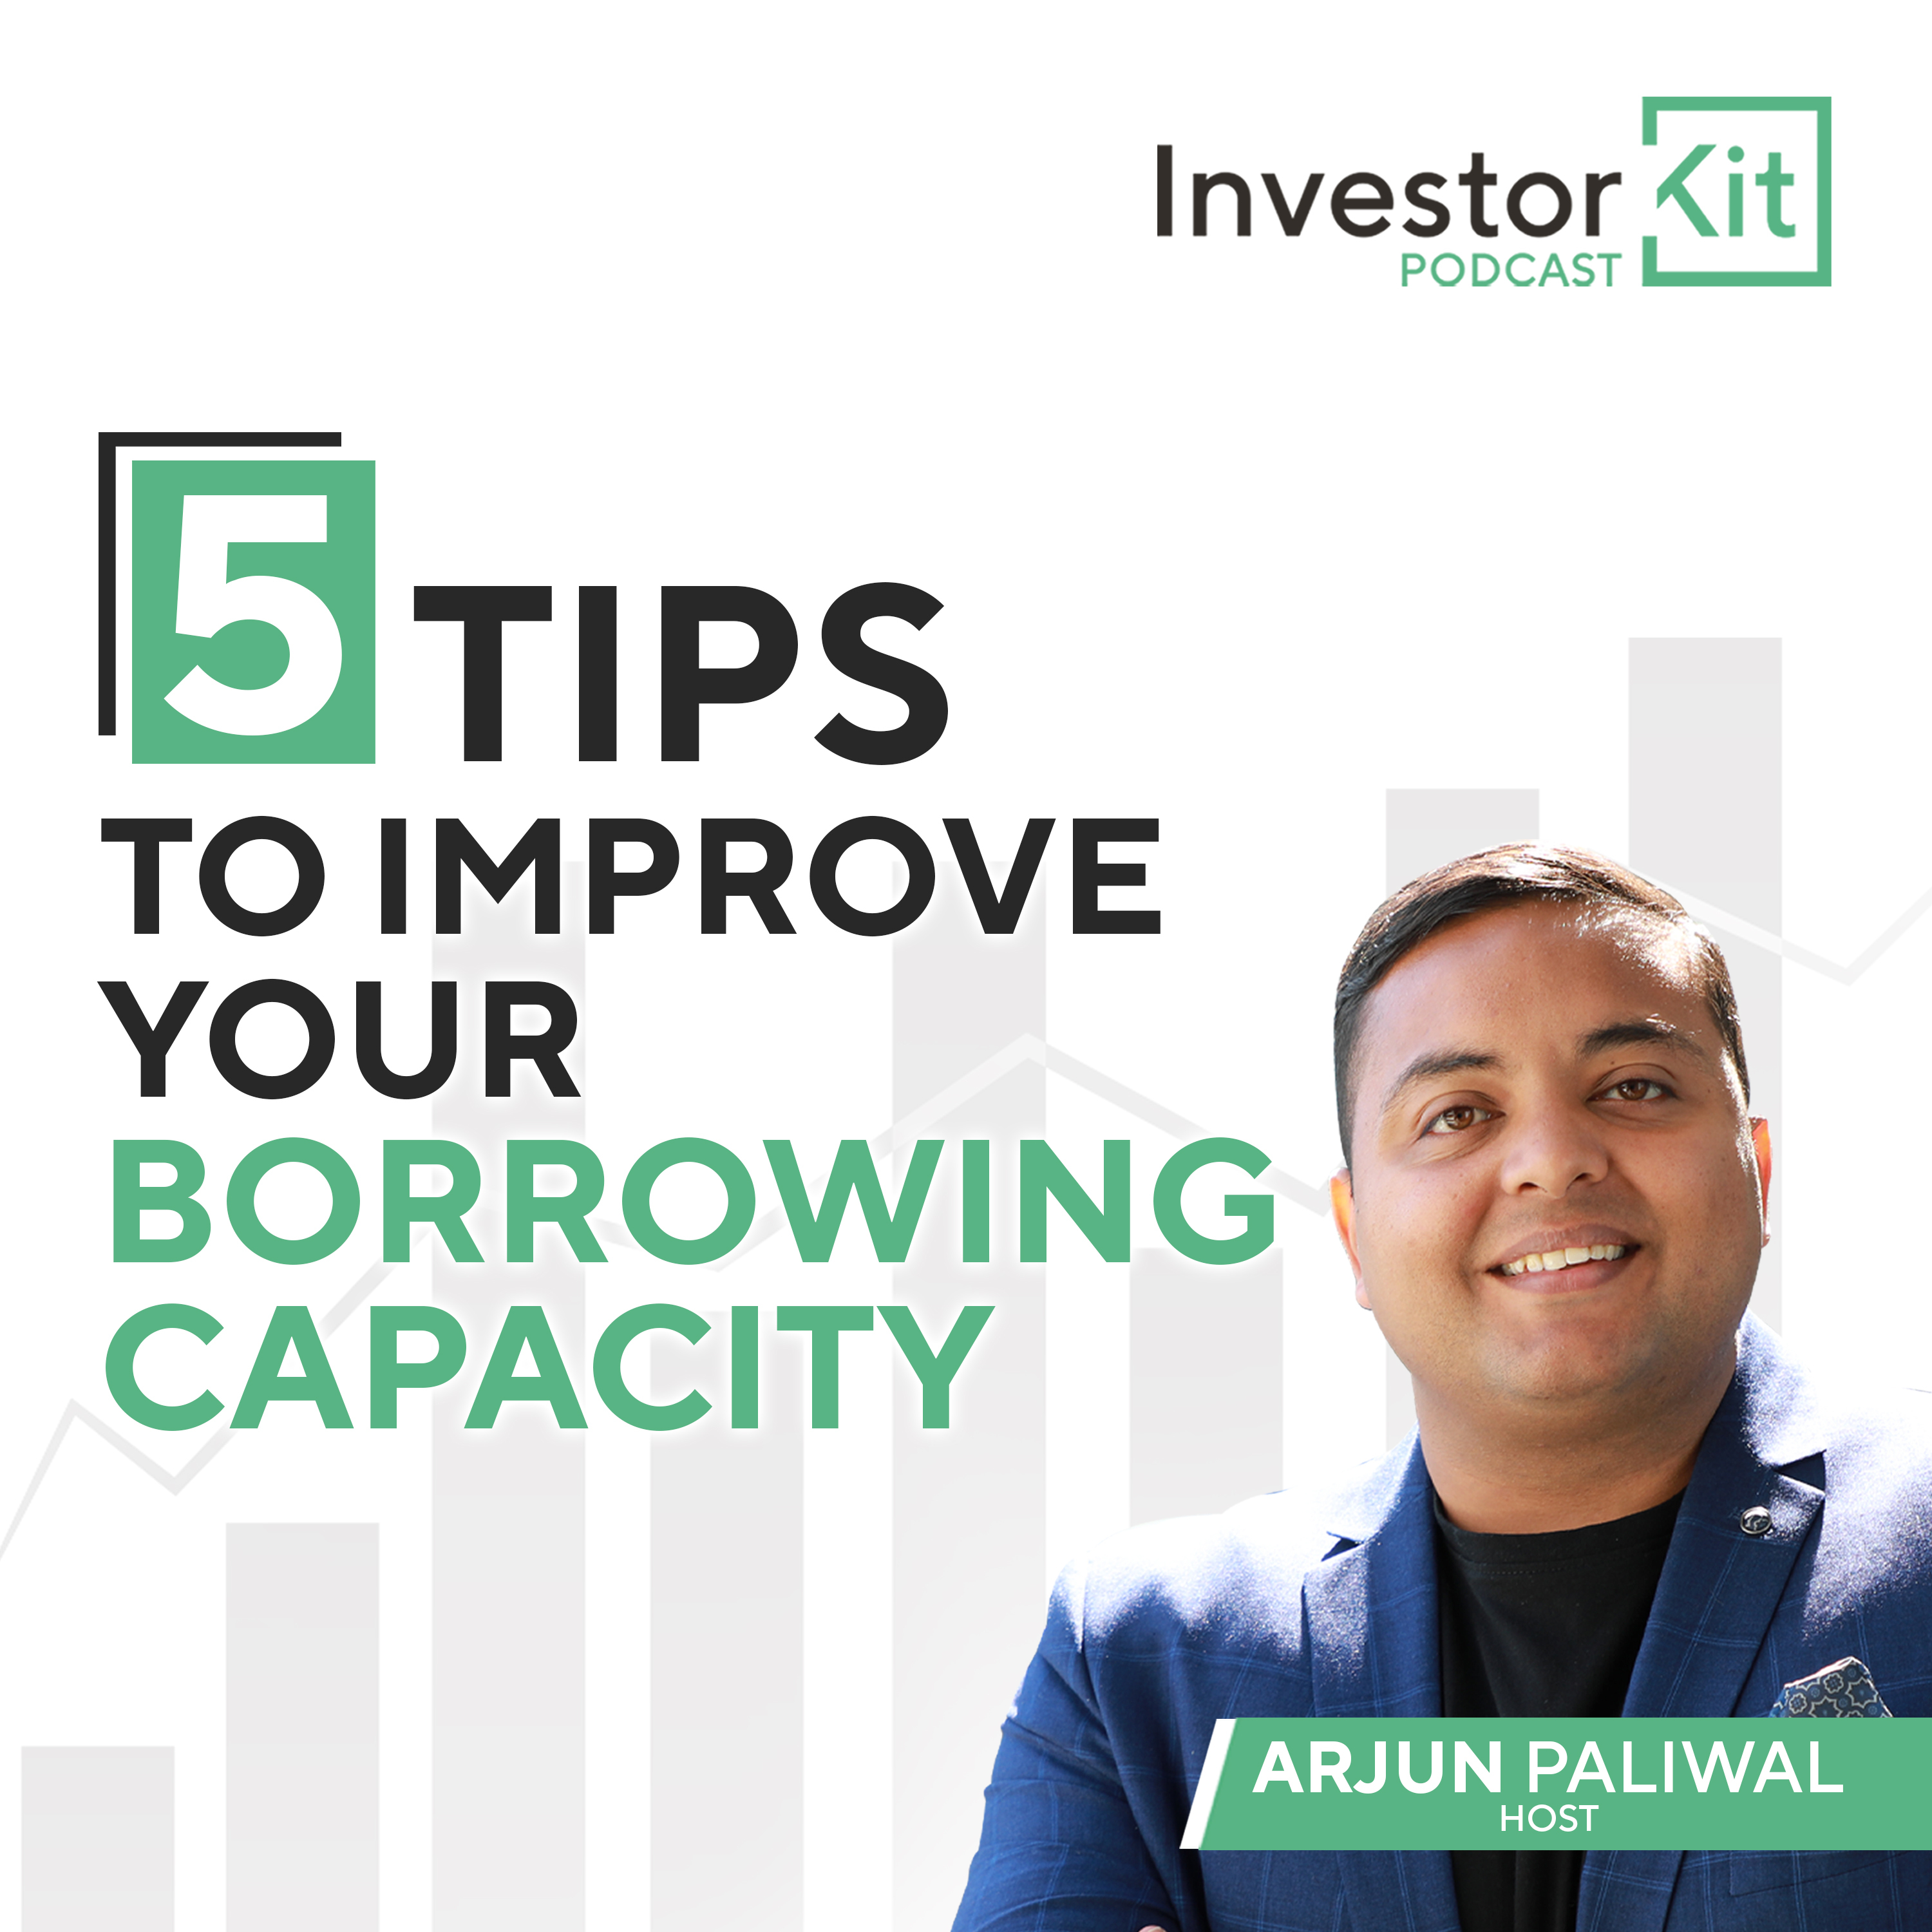 5 Tips to Improve Your Borrowing Capacity